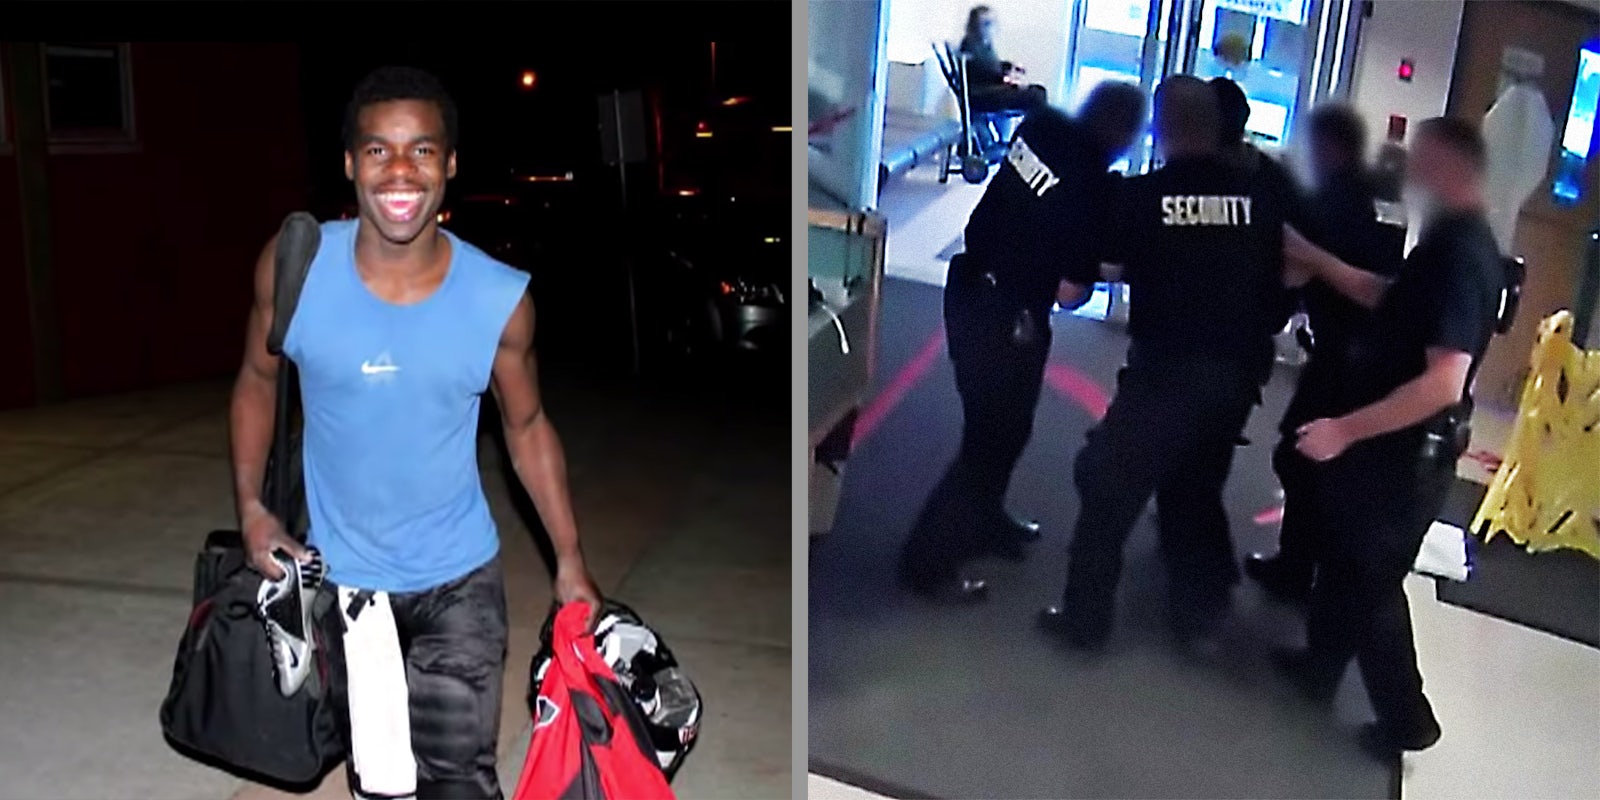 A smiling teen (L) and police removing the teenager from a hospital (R).